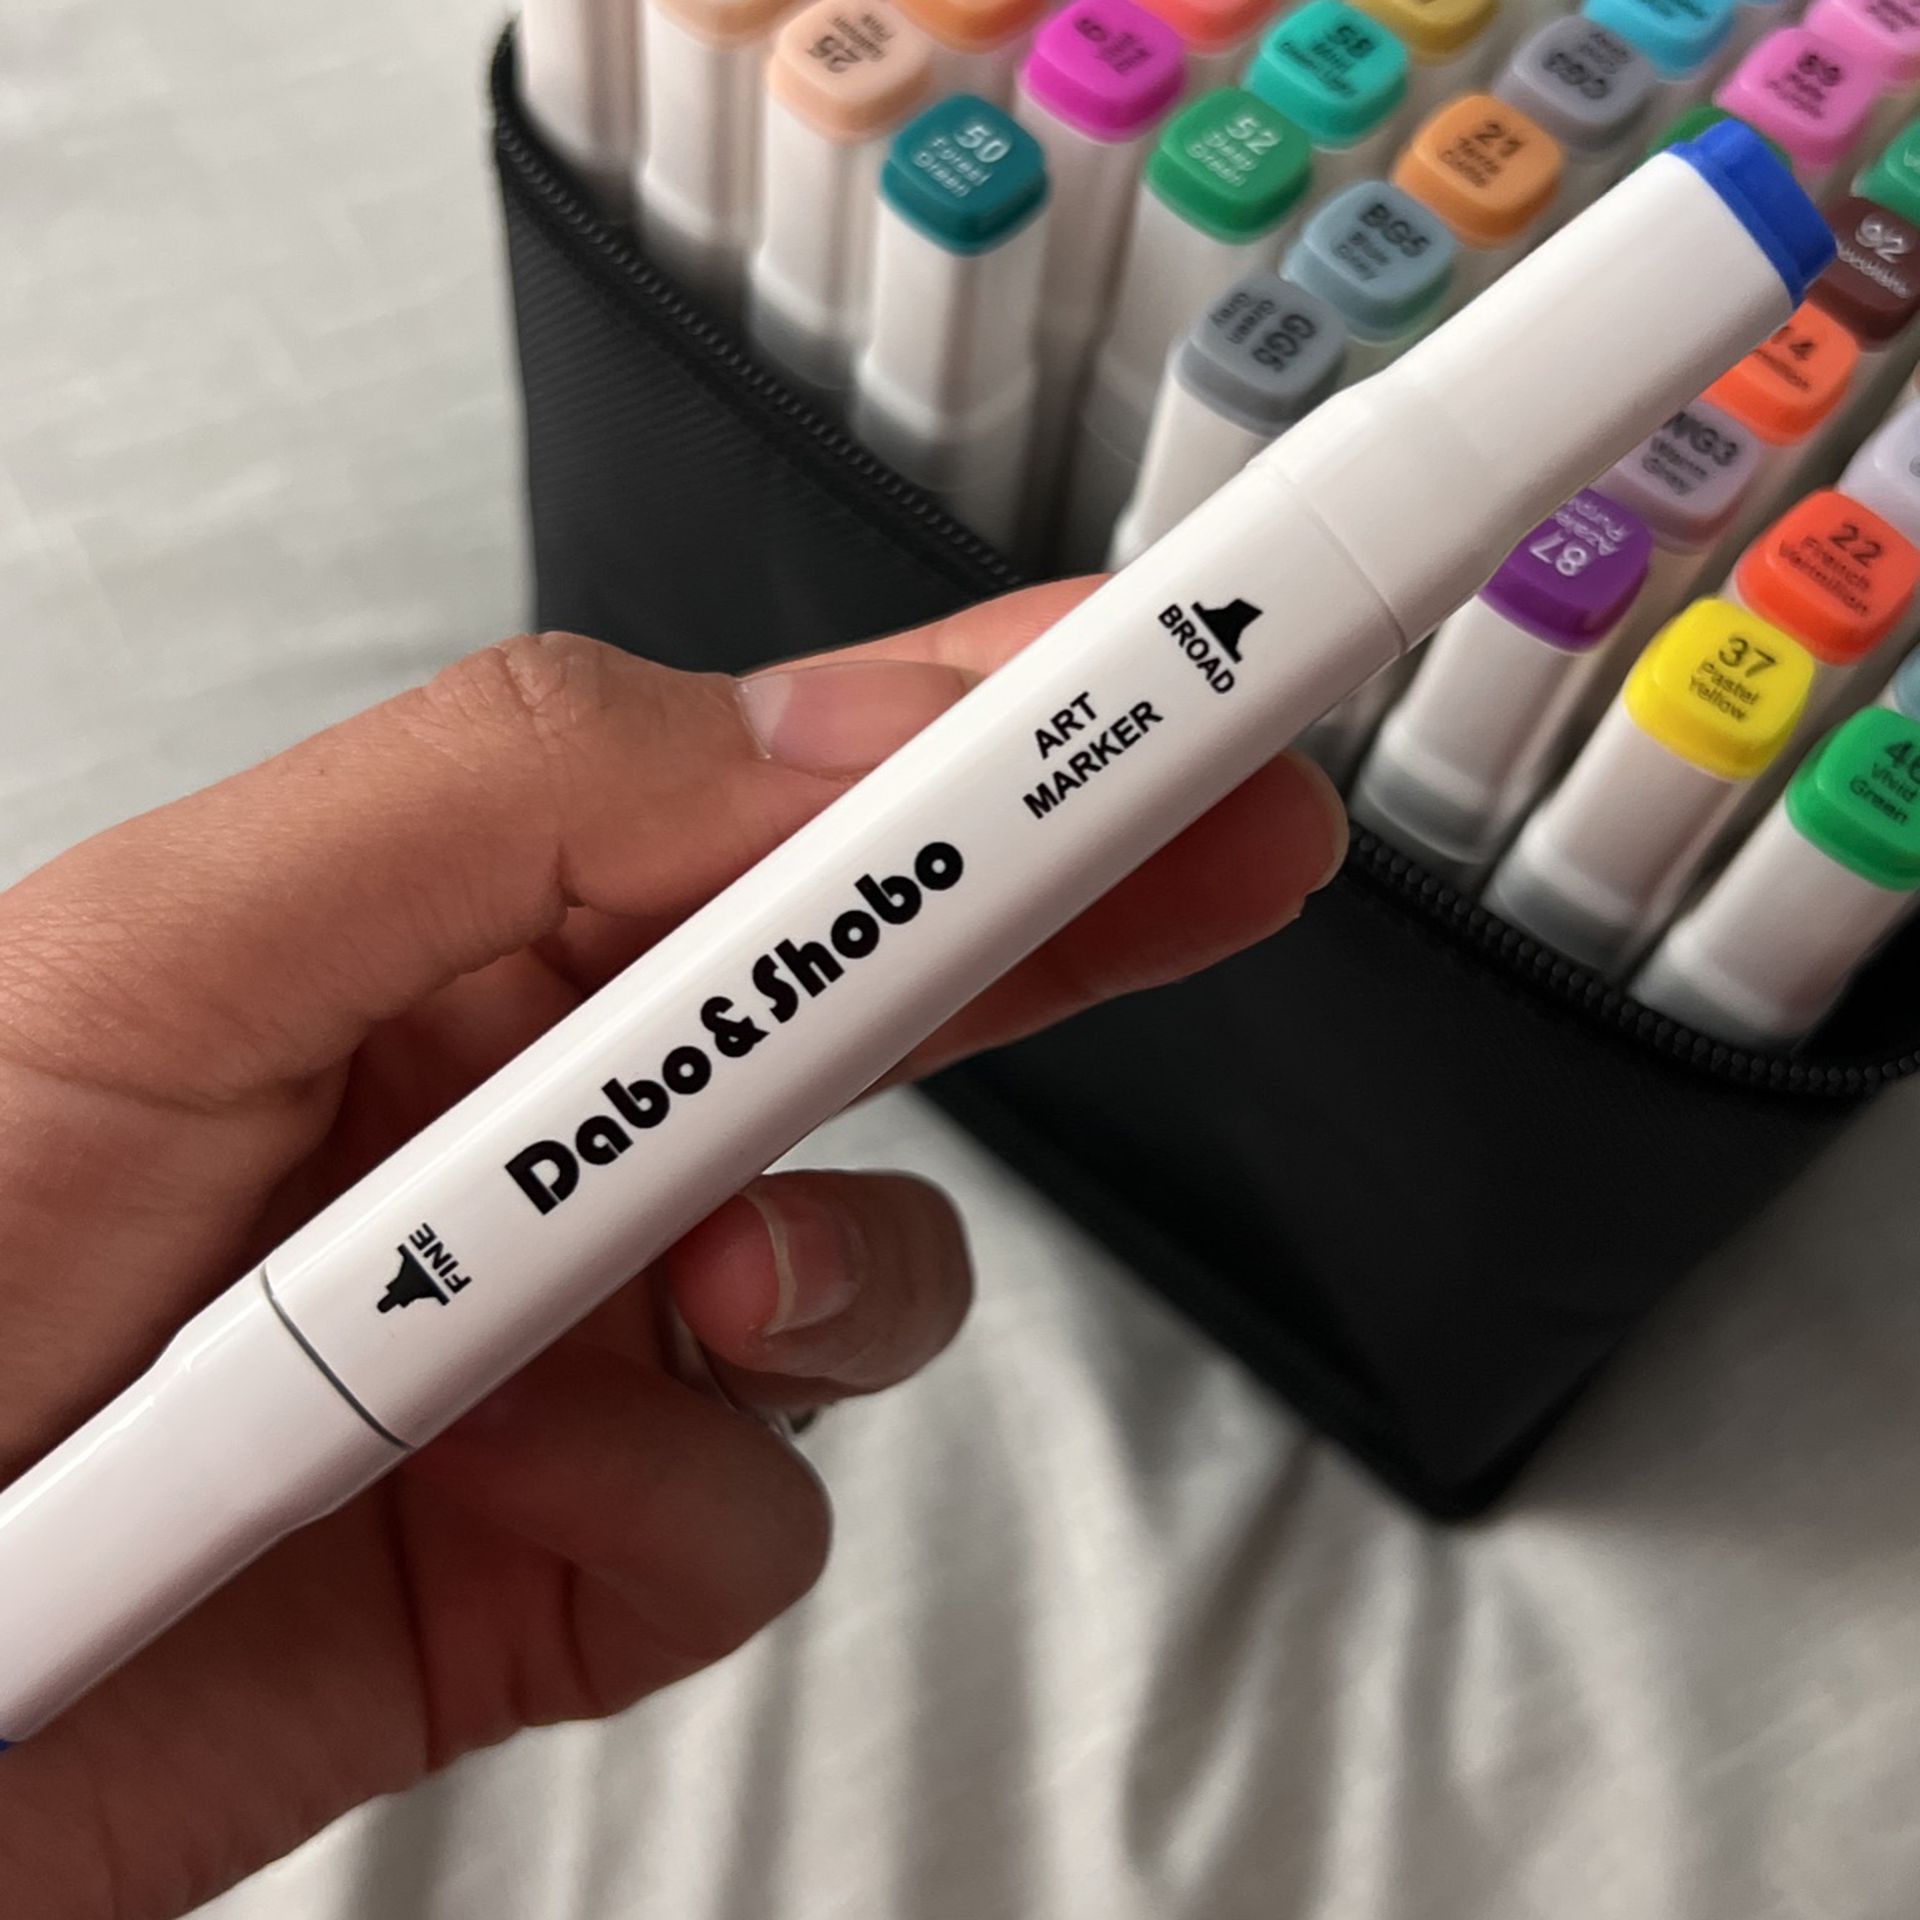 dabo and shobo markers in action｜TikTok Search